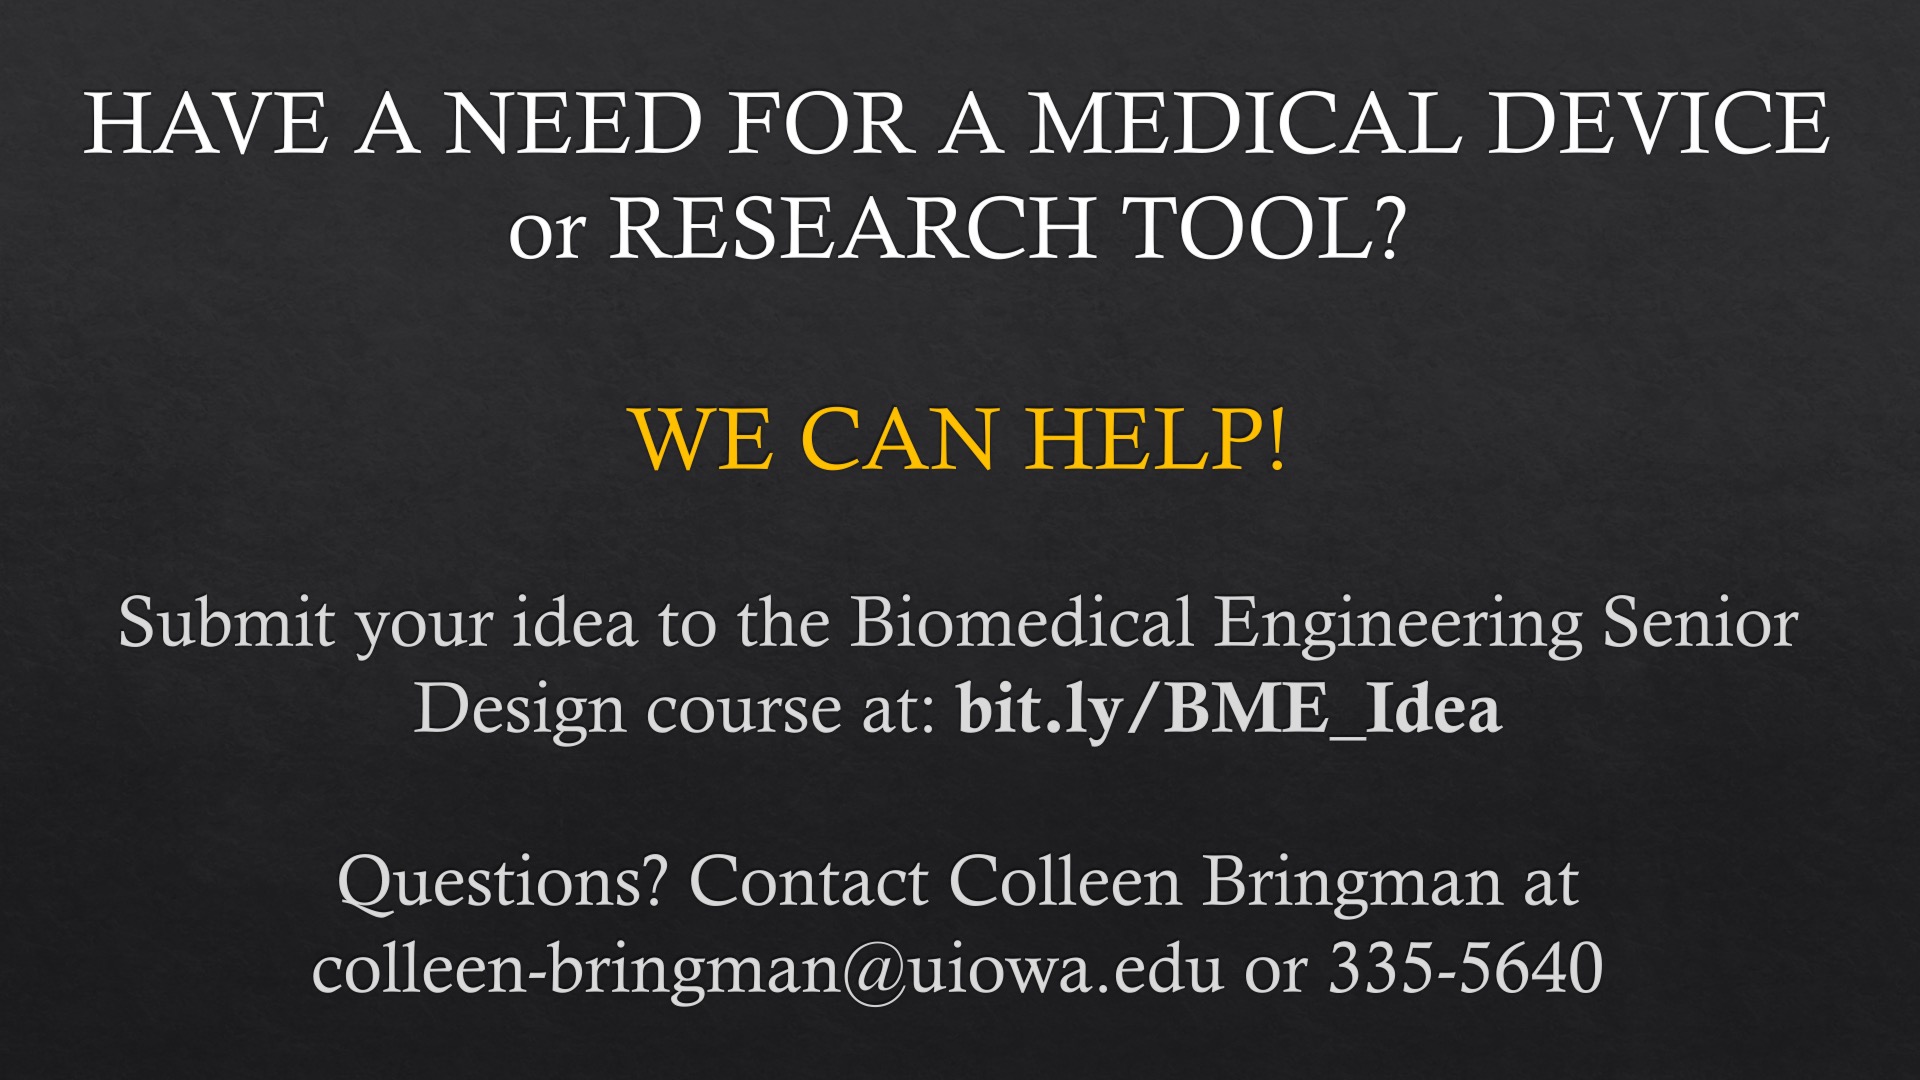 Medical Device or Research Tool need